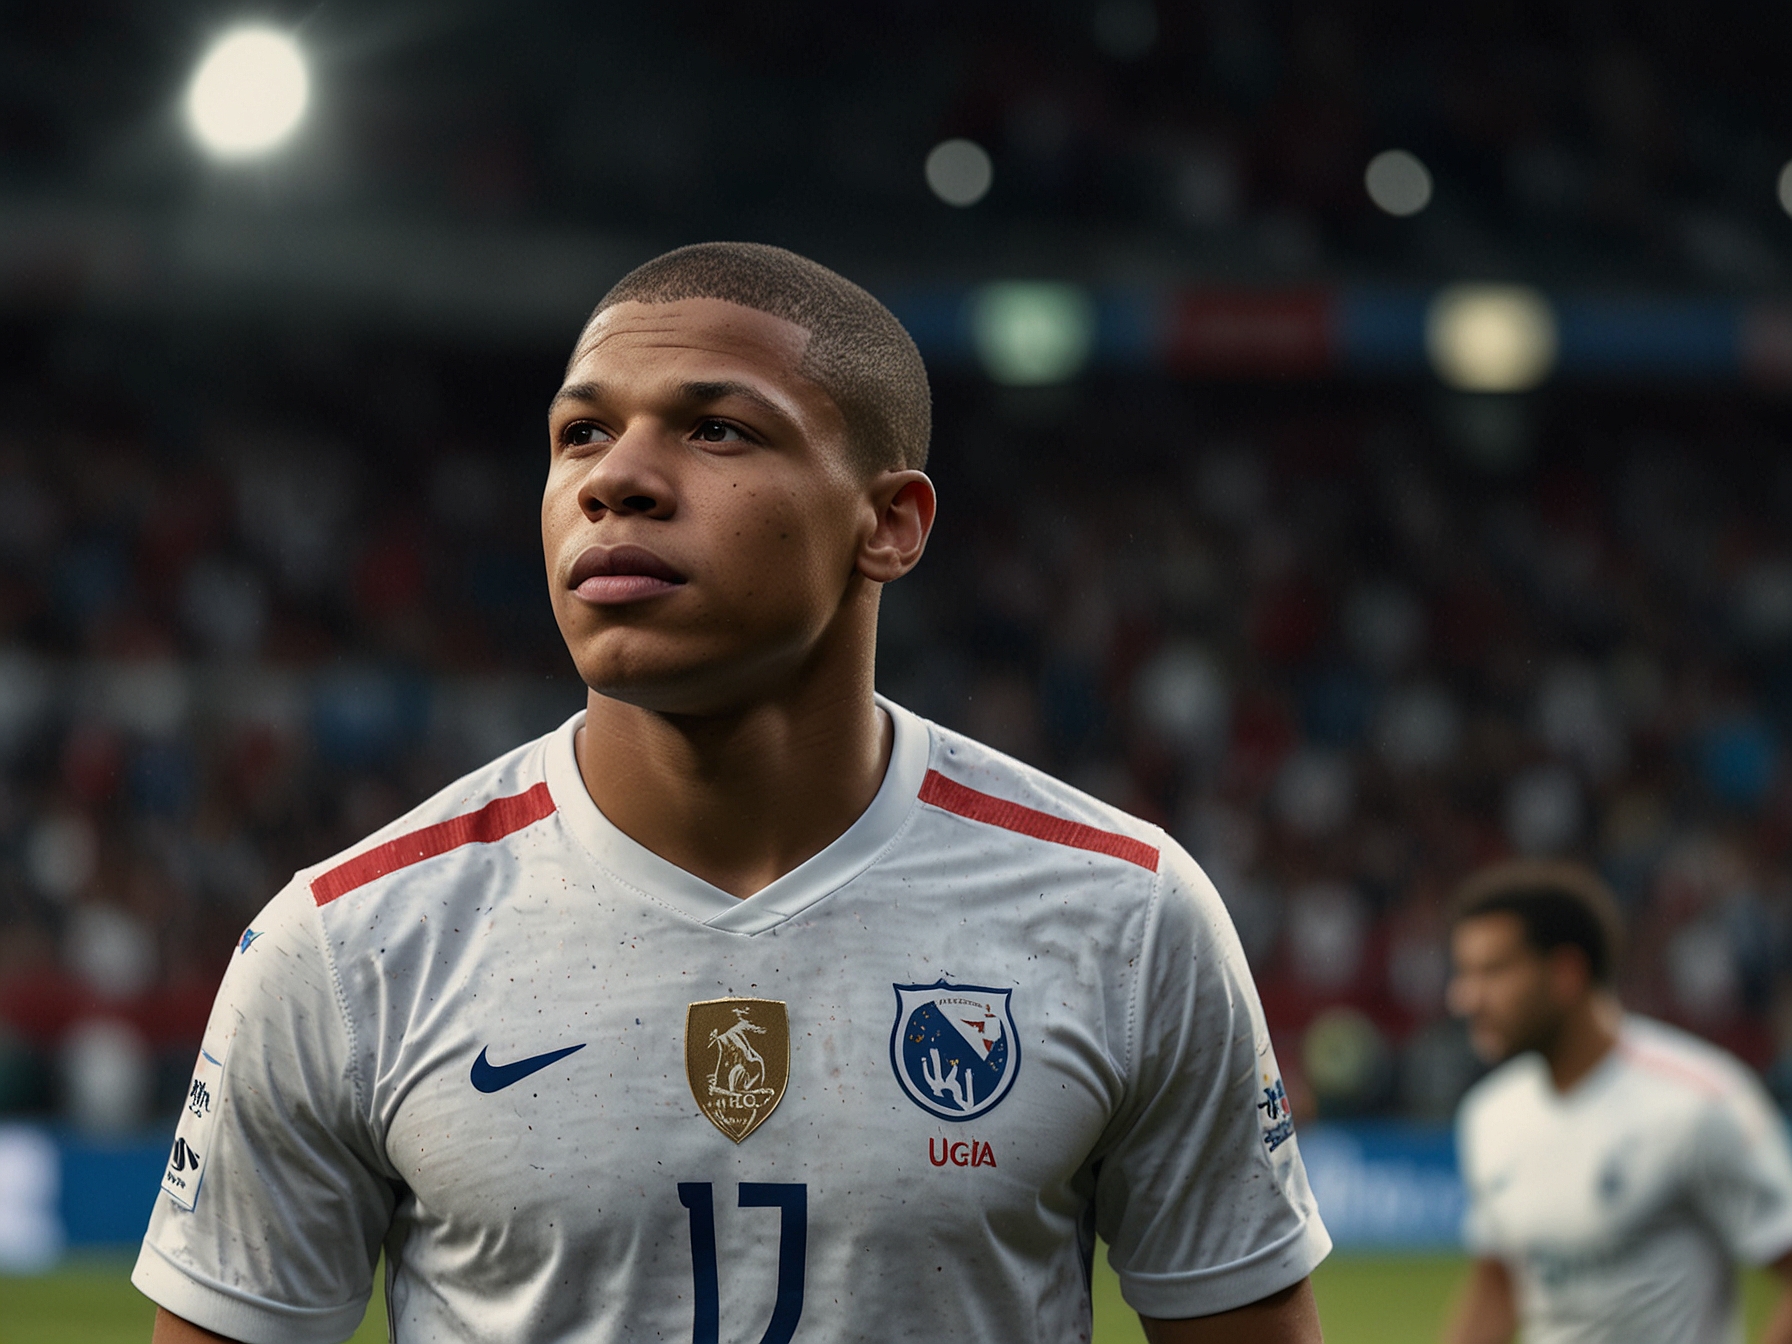 Kylian Mbappe donned in the French national team jersey, leading his teammates during a crucial Euro 2024 match, exemplifying his leadership and determination to win the championship.